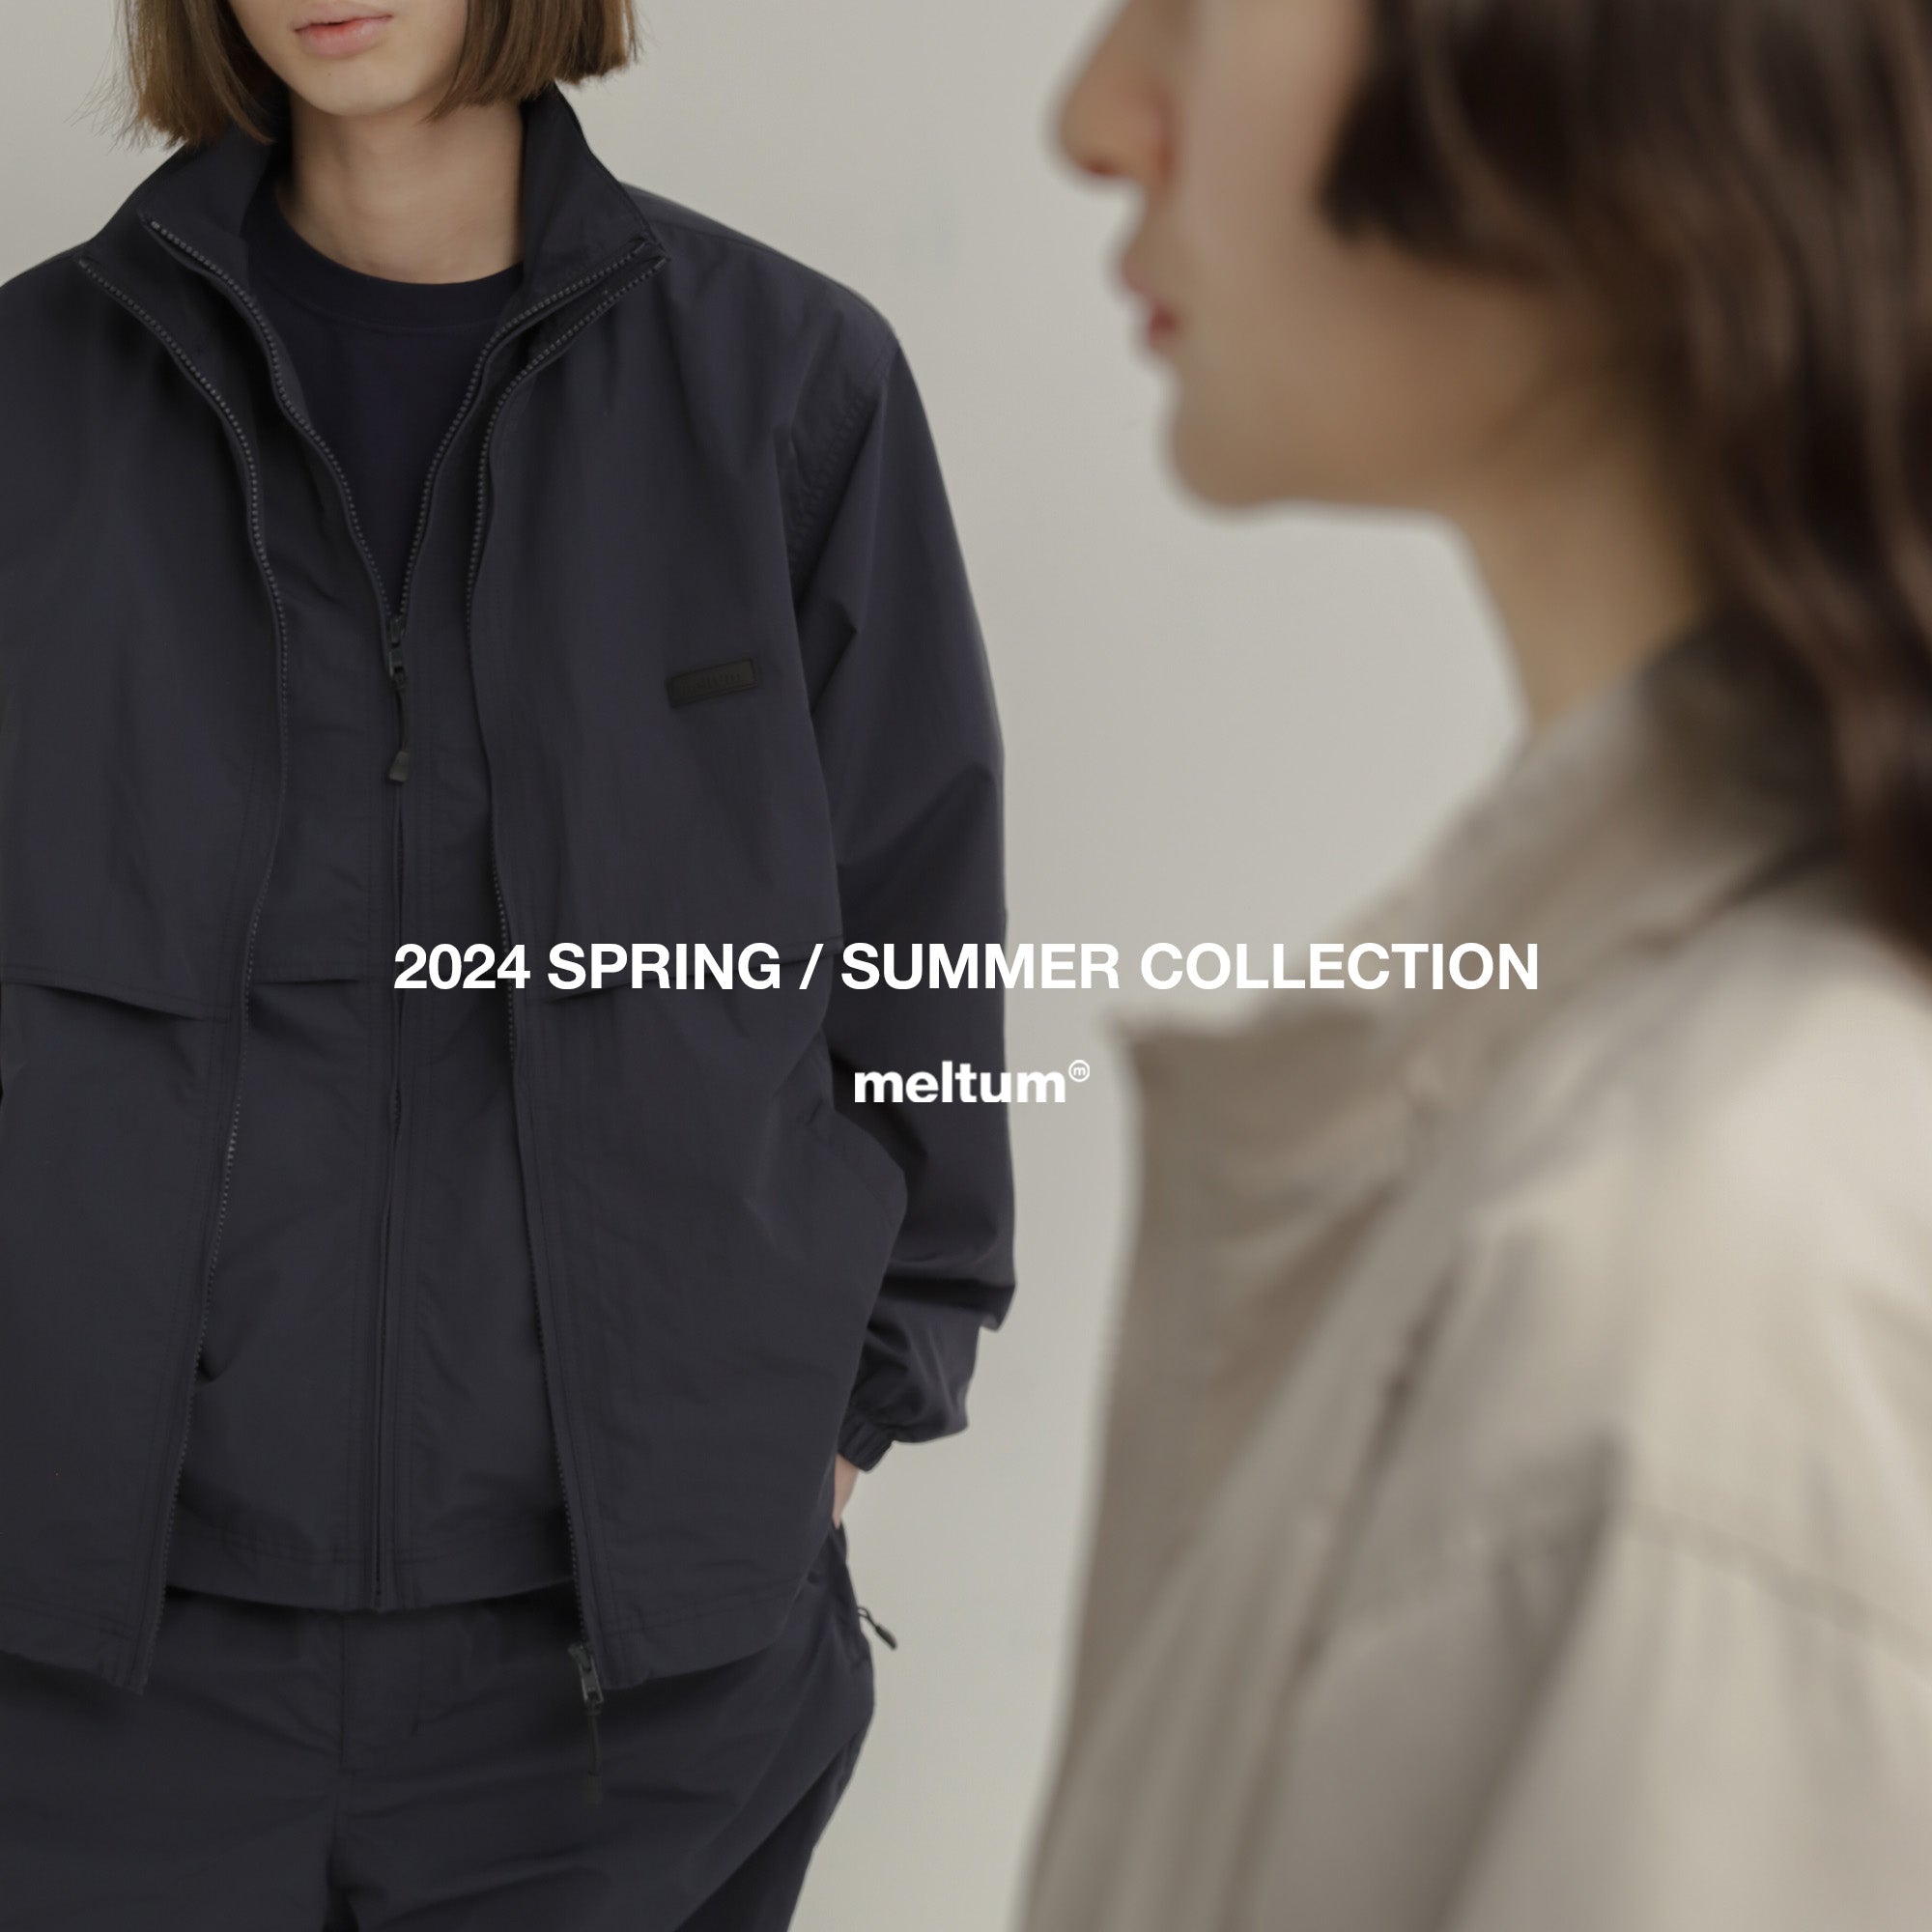 2024 SPRING / SUMMER COLLECTION